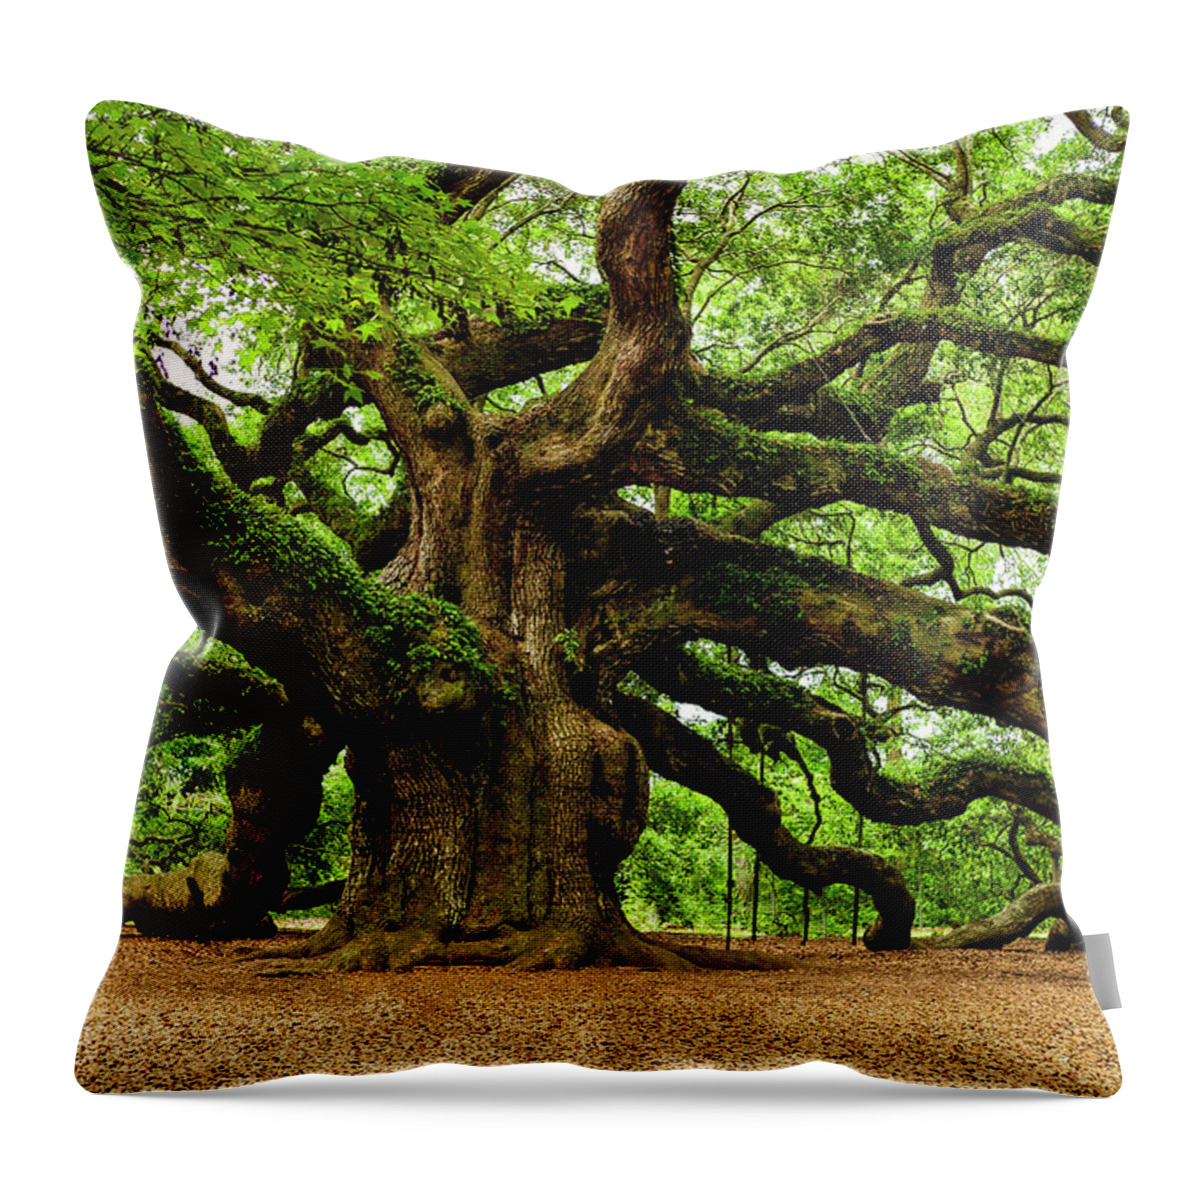 Charleston Throw Pillow featuring the photograph Mystical Angle Oak Tree larger image by Louis Dallara